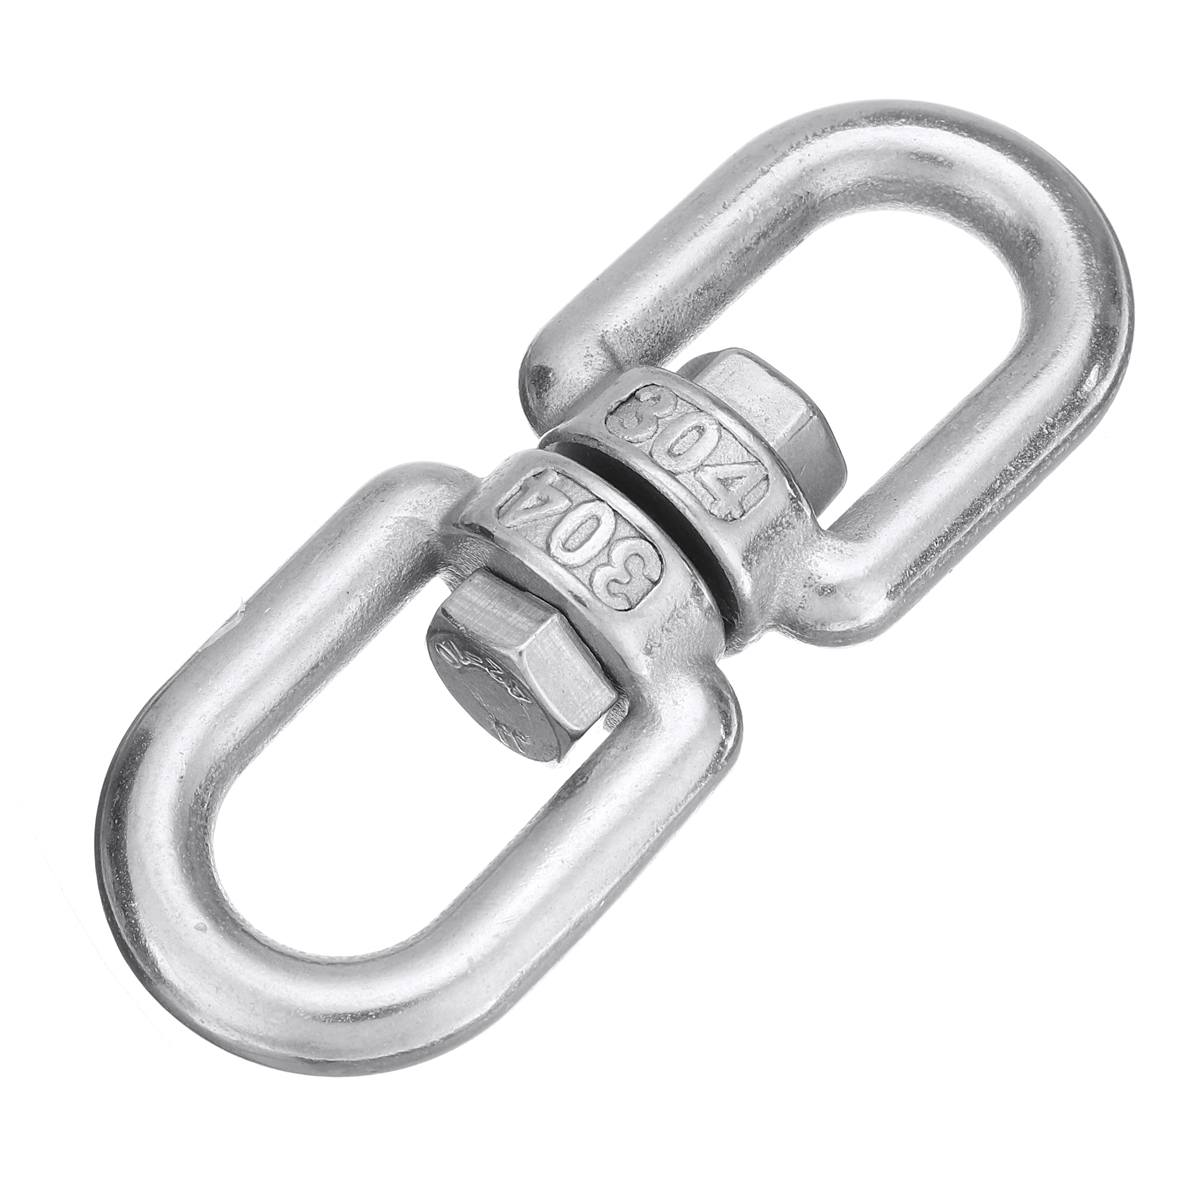 13Pcs-Hammock-Chair-Hanging-Basket-Accessories-Stainless-Steel-Fixed-Buckles-1782407-8